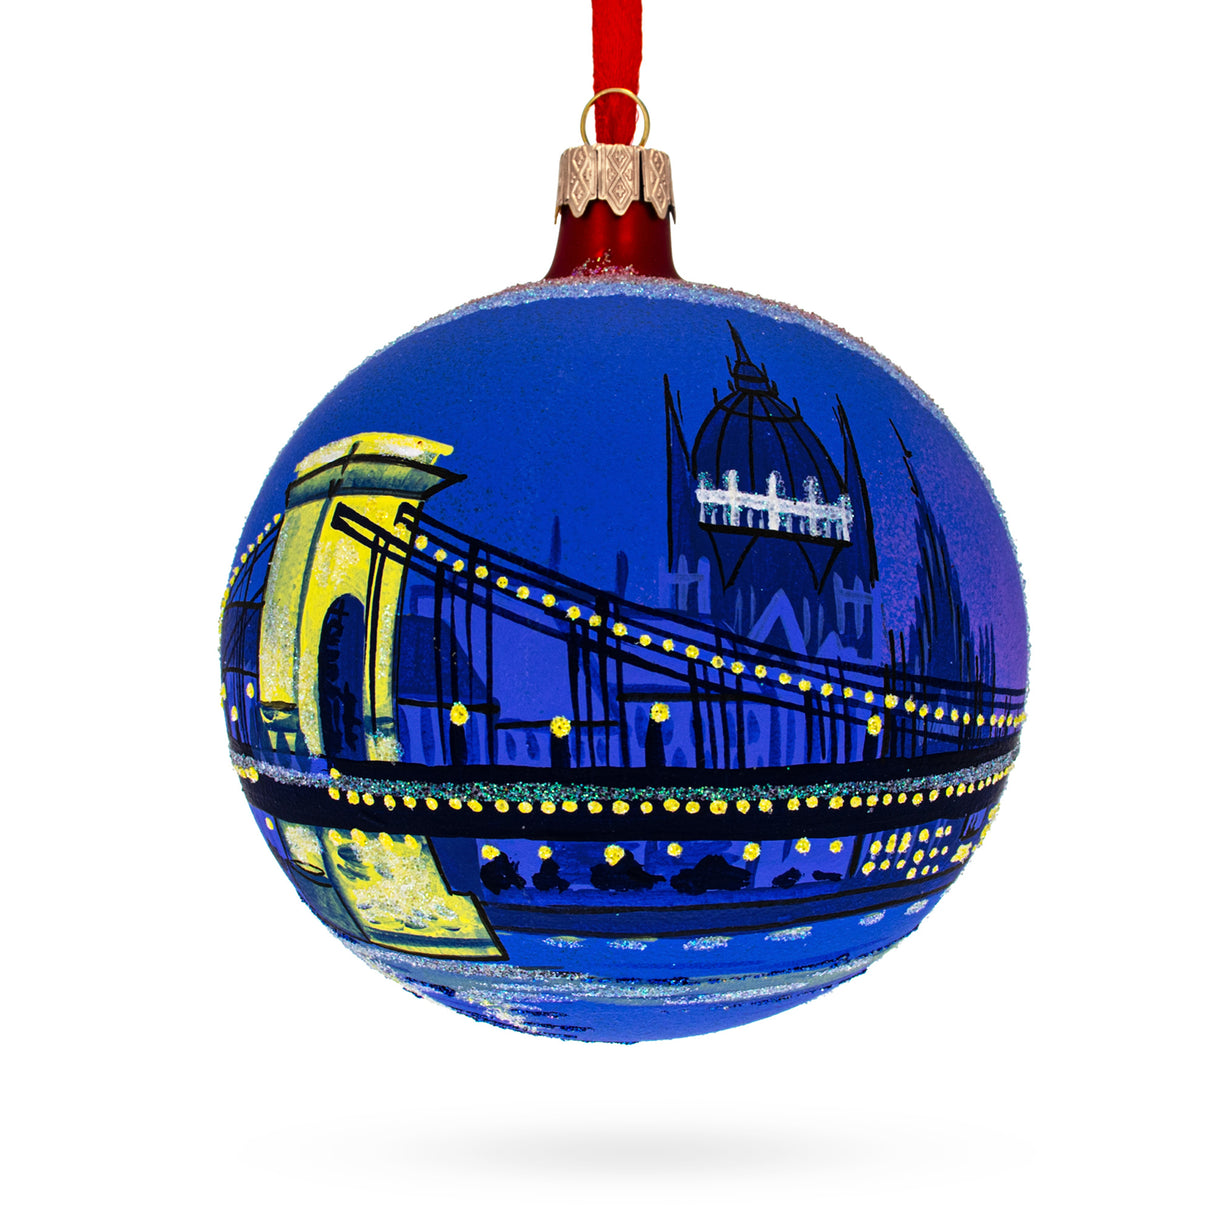 Glass The Széchenyi Chain Bridge, Budapest, Hungary Glass Ball Christmas Ornament 4 Inches in Multi color Round